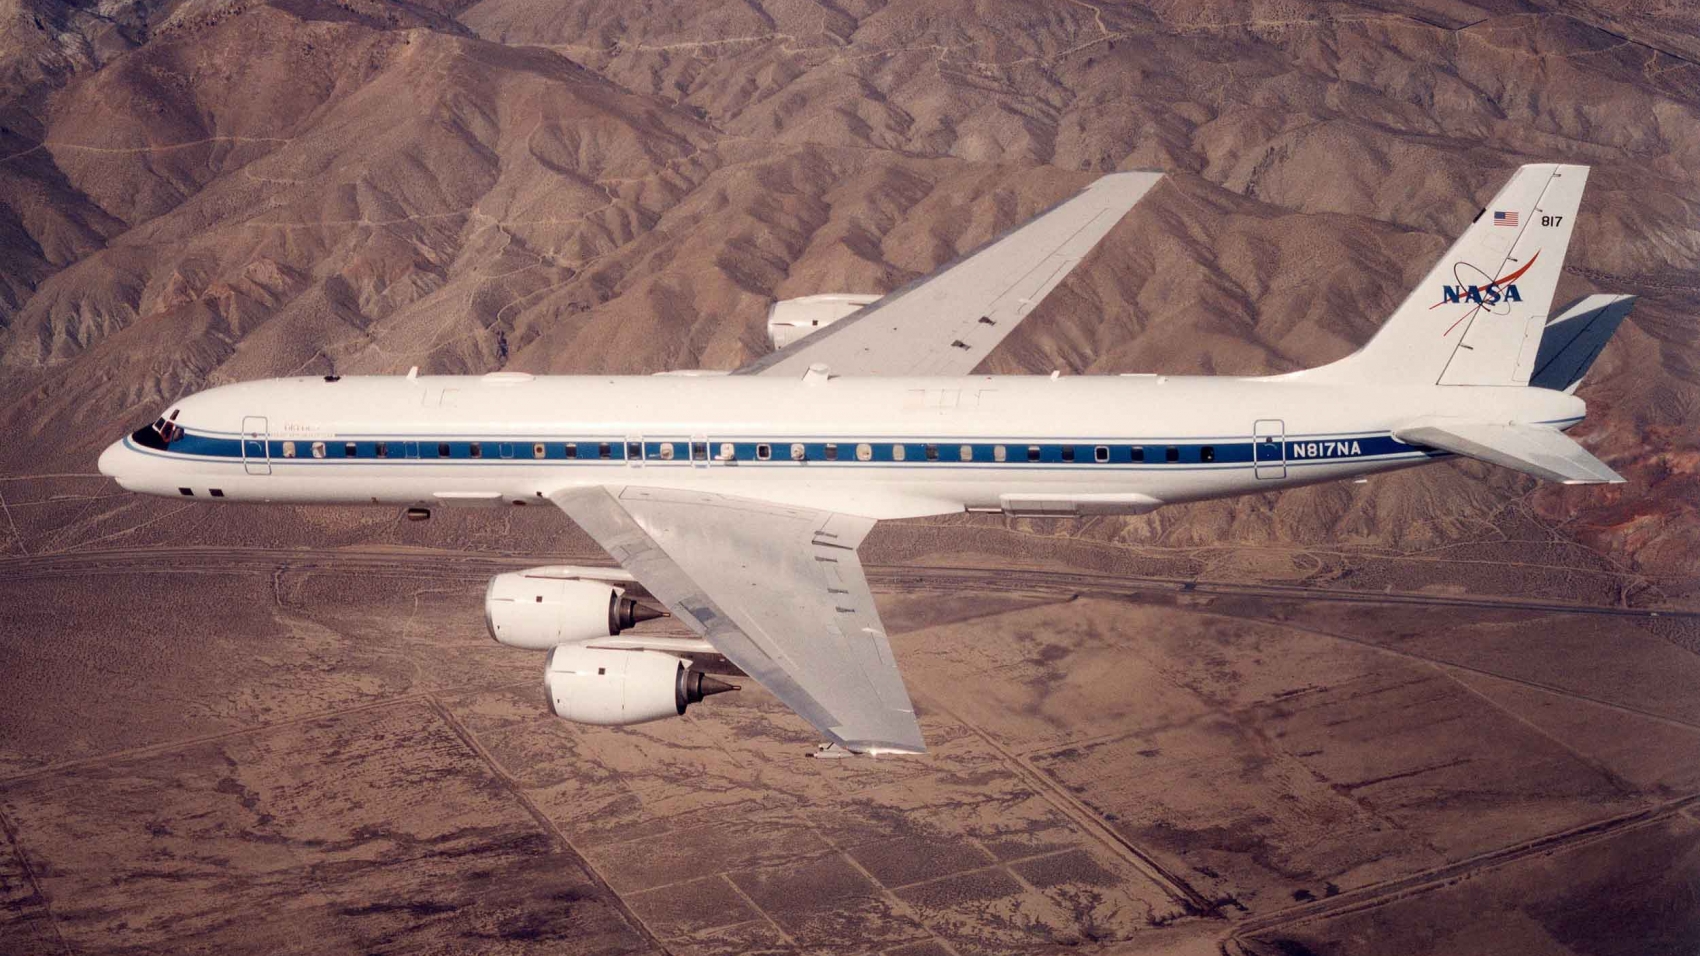 DC-8 Airborne Laboratory in flight - Image Credit: NASA Dryden Flight Research Center Photo Collection (http://www.dfrc.nasa.gov/gallery/photo/index.html)  NASA Photo: EC00-0050-1  Date February 2000